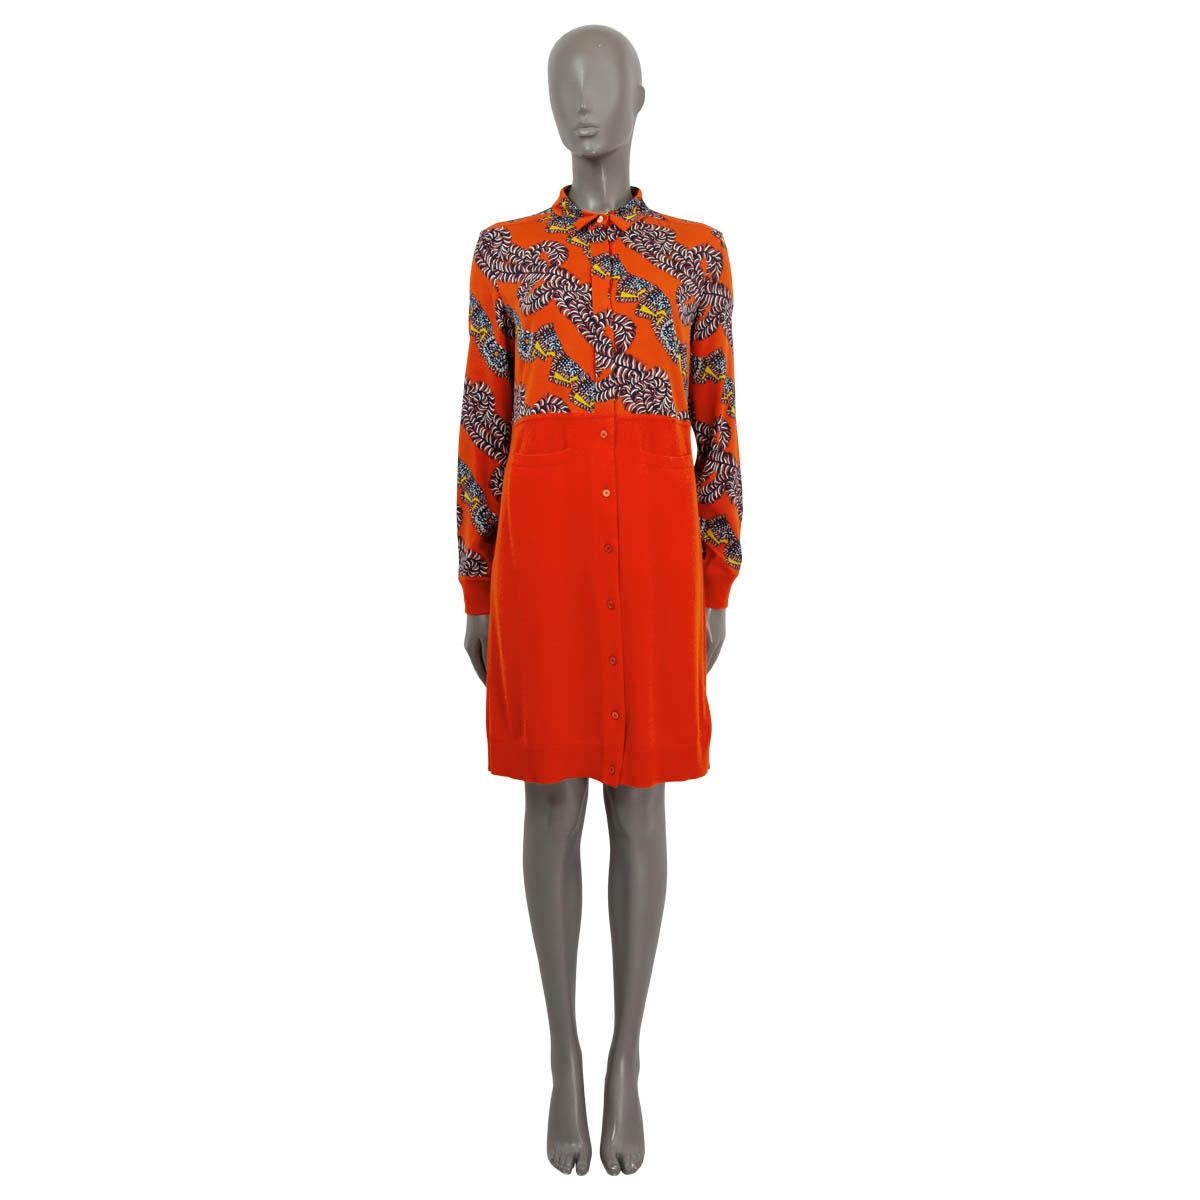 100% authentic Hermès Pre-Fall 2018 long sleeve shirt dress in orange, navy, yellow, burgundy, light blue and off-white silk (94%), elastane (6%) and the knit parts in orange wool (80%) and cashmere (20%). Opens with buttons on the front. Unlined.